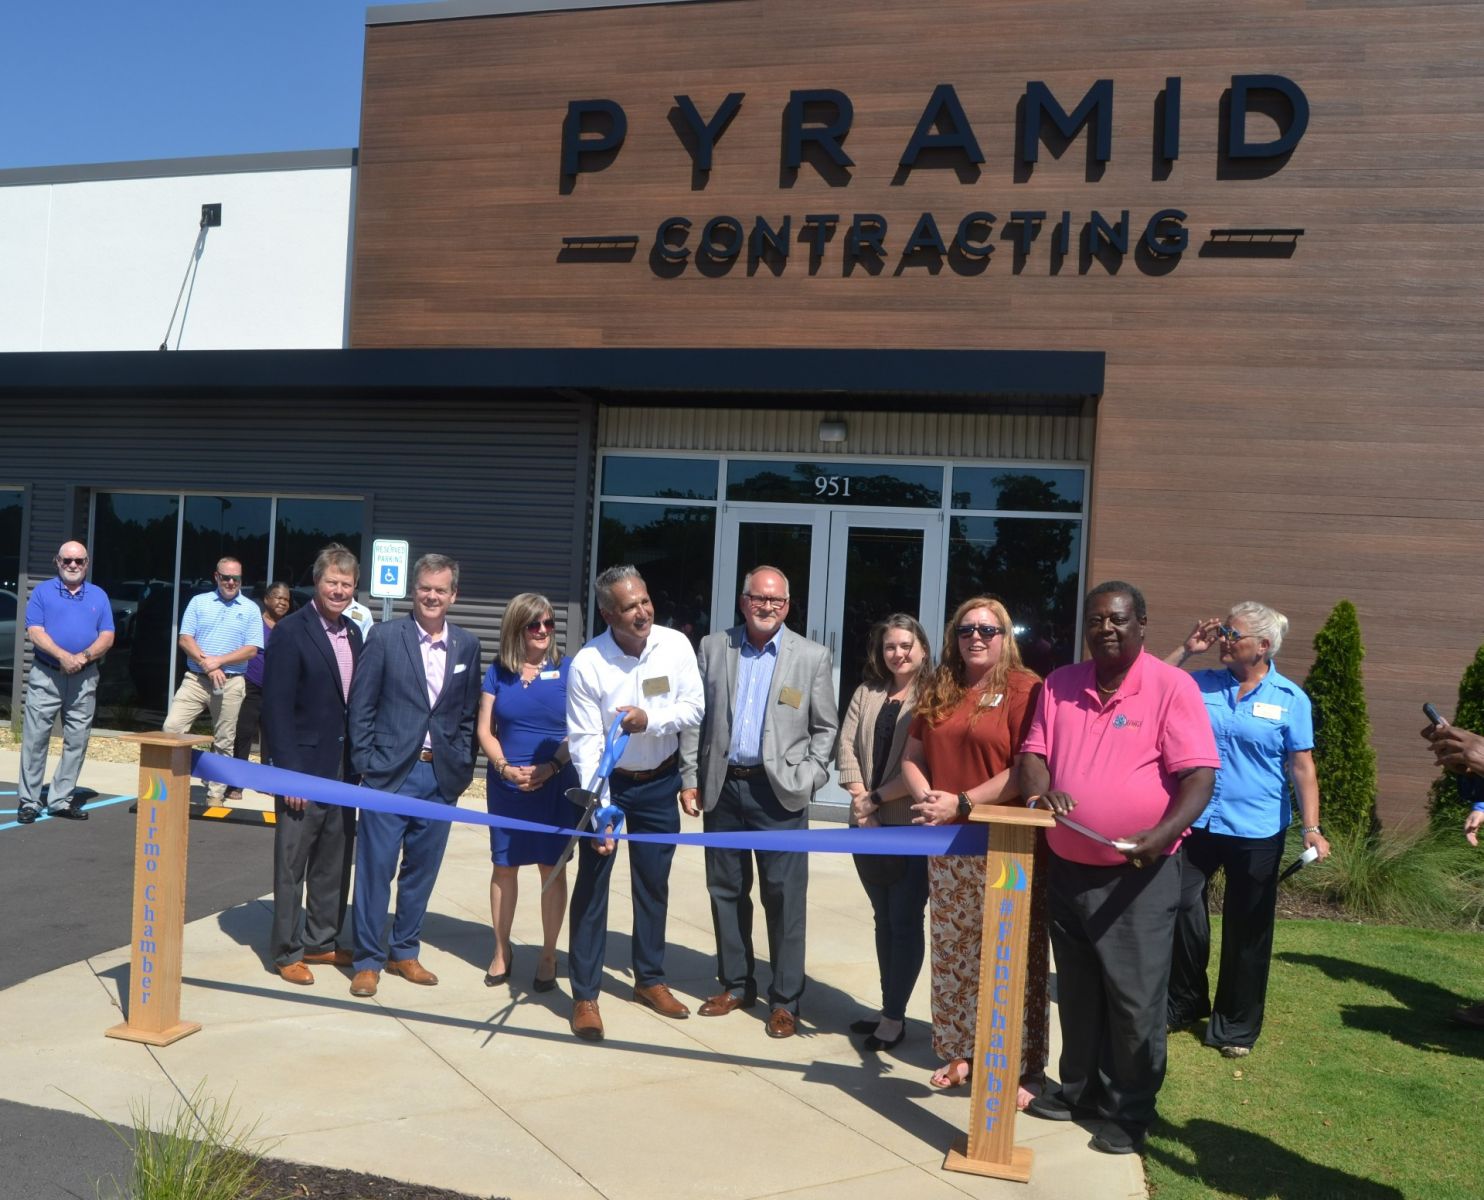 Bobby Alexander (center, with scissors), president of Pyramid Contracting, cuts the ribbon on the company's new Irmo headquarters on Wednesday. (Photo/Melinda Waldrop)